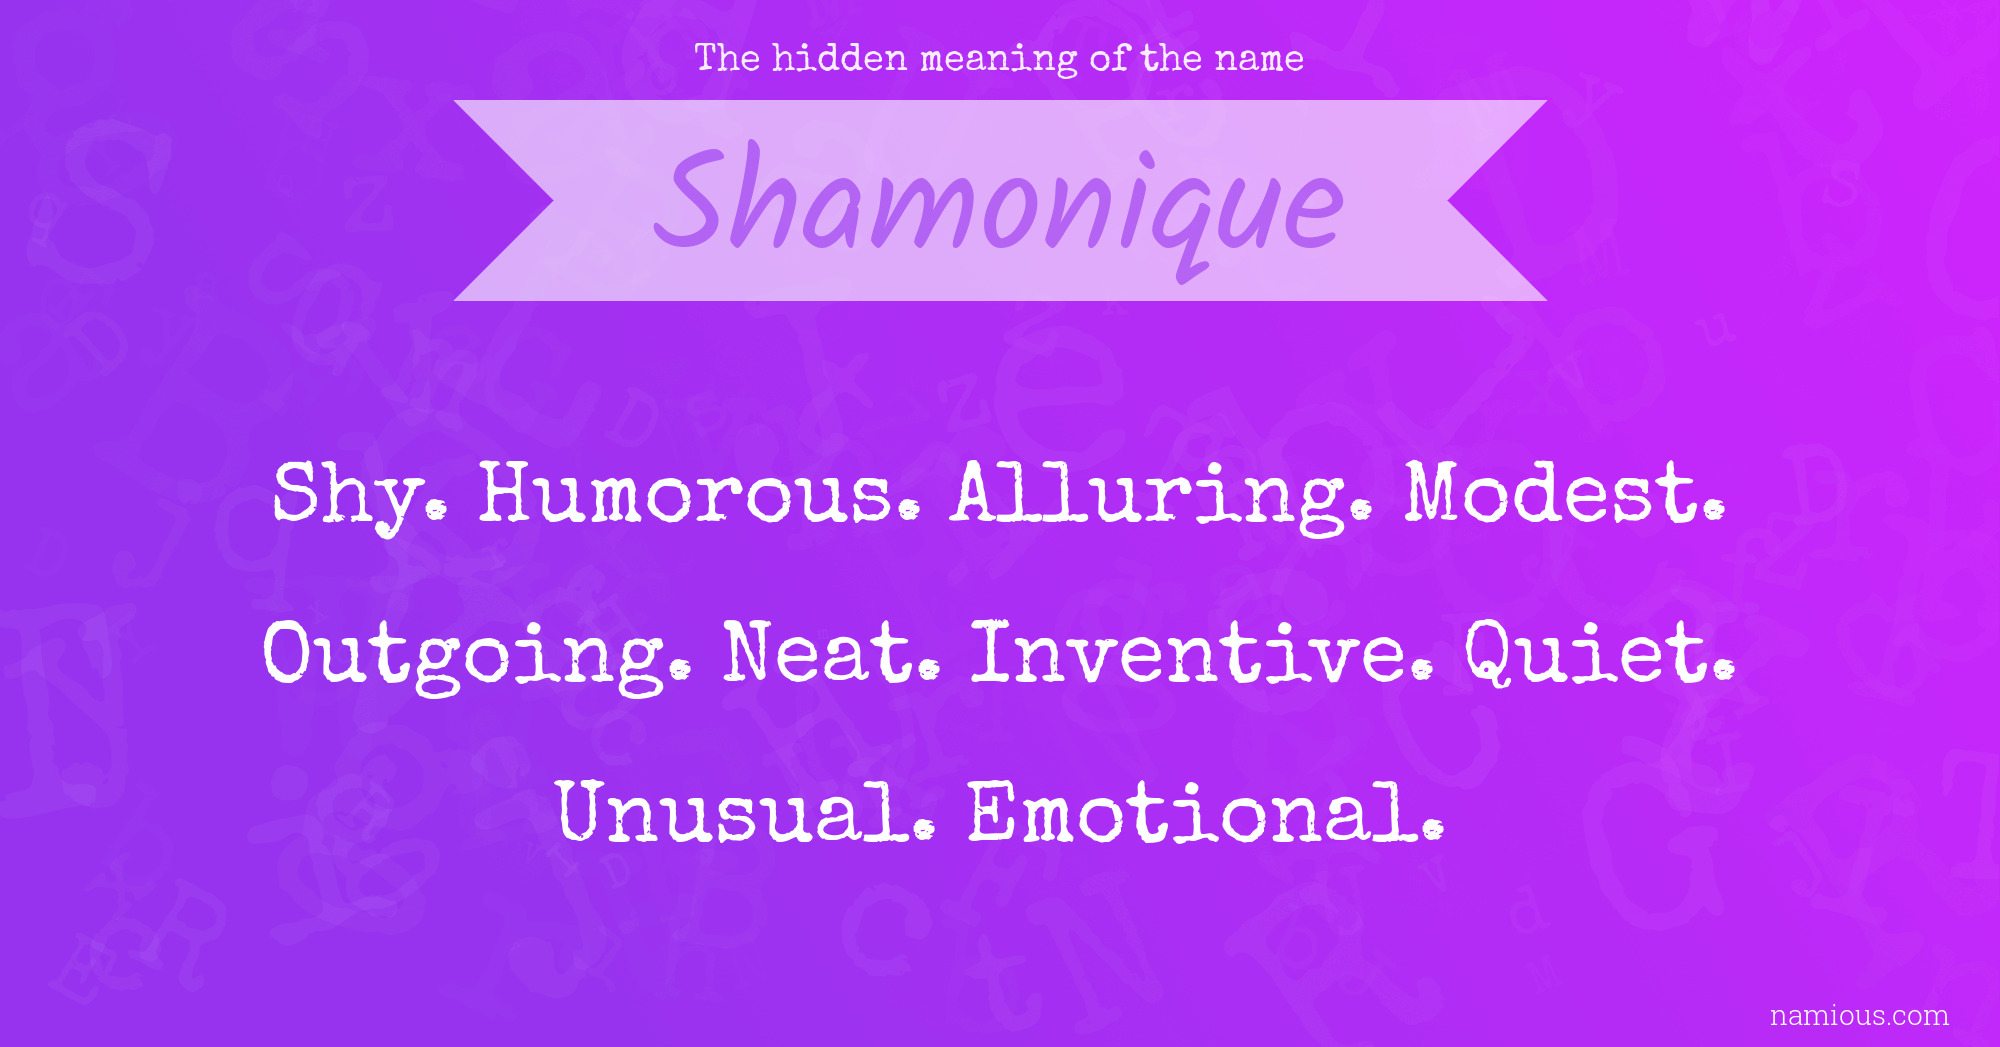 The hidden meaning of the name Shamonique